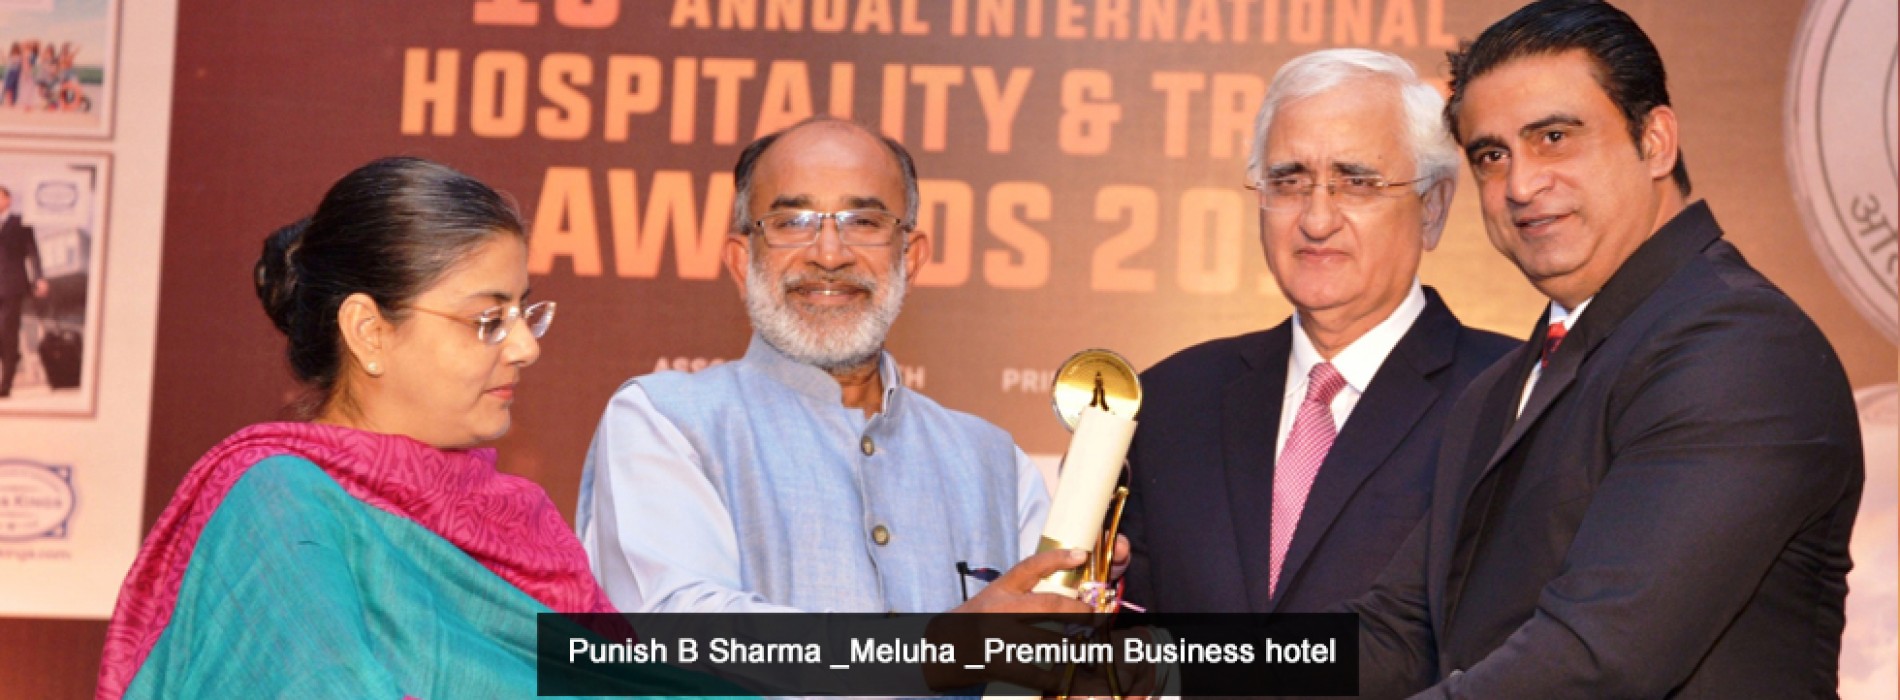 Meluha-The Fern, Mumbai receives three Awards for Excellence in Hospitality Industry